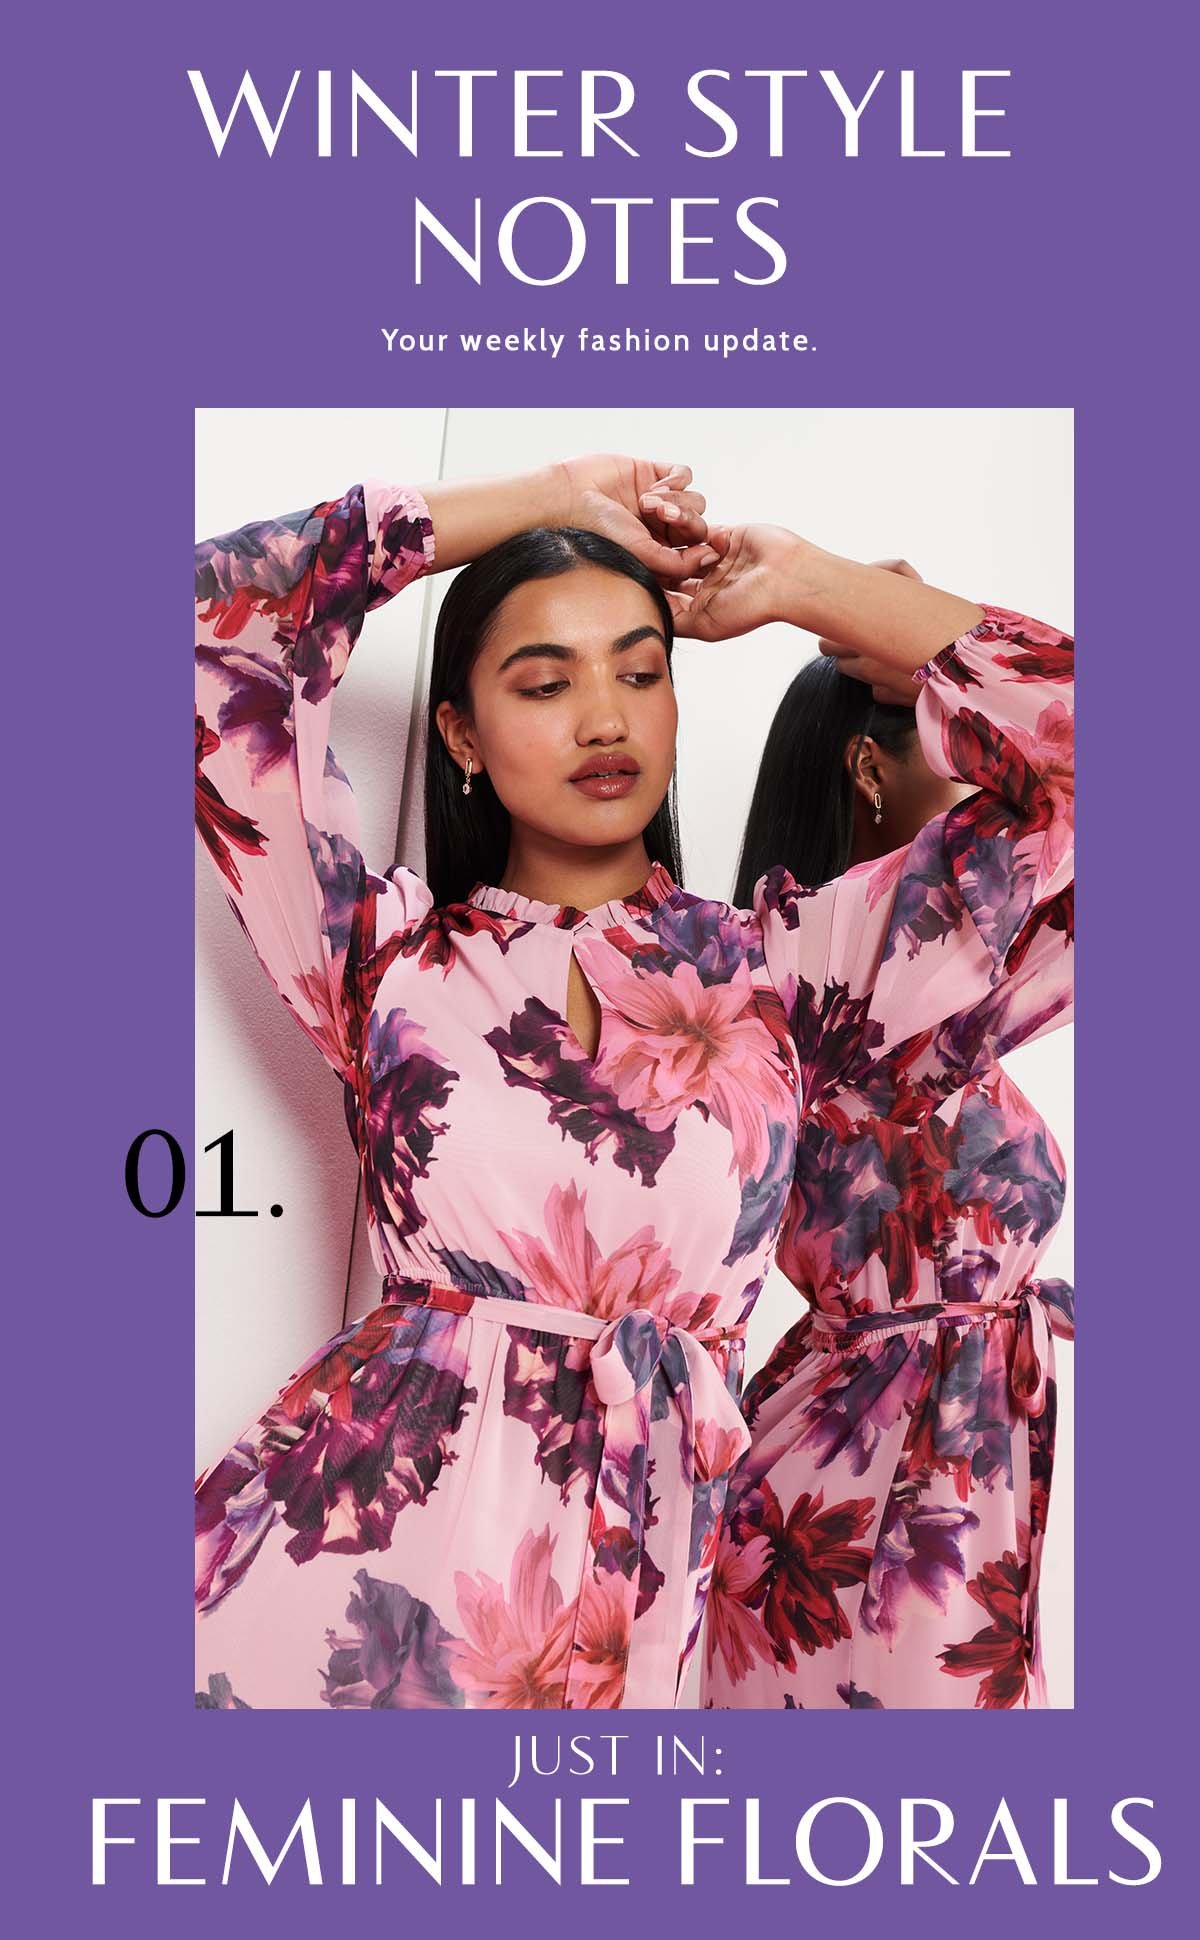 Winter Style Notes. Your weekly fashion update. 01. Just In: Feminine Florals